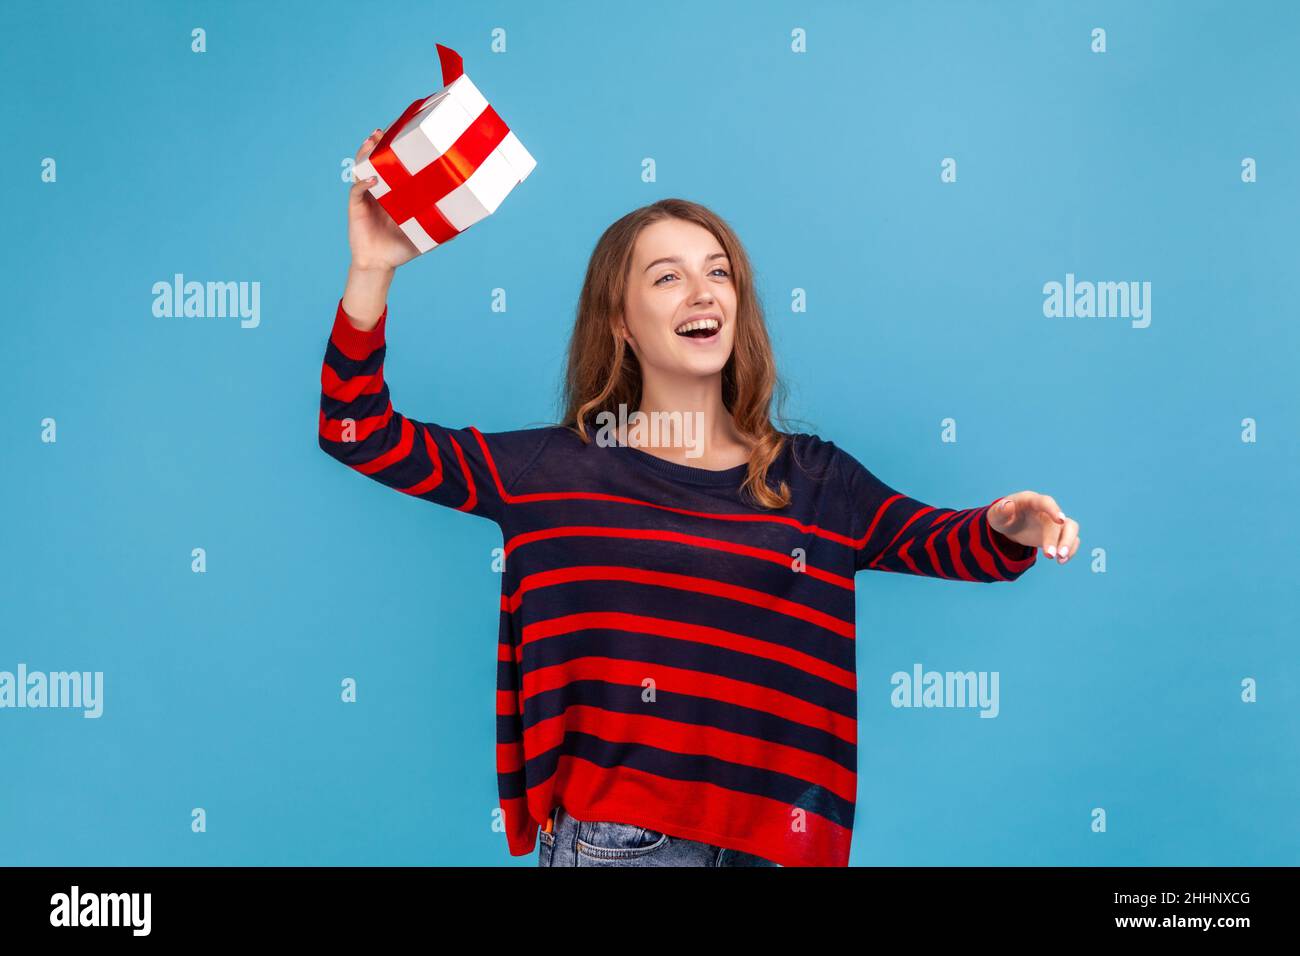 Happy excited woman wearing striped casual style sweater, throwing present box, having happy look, celebrating holiday, congratulating. Indoor studio shot isolated on blue background. Stock Photo